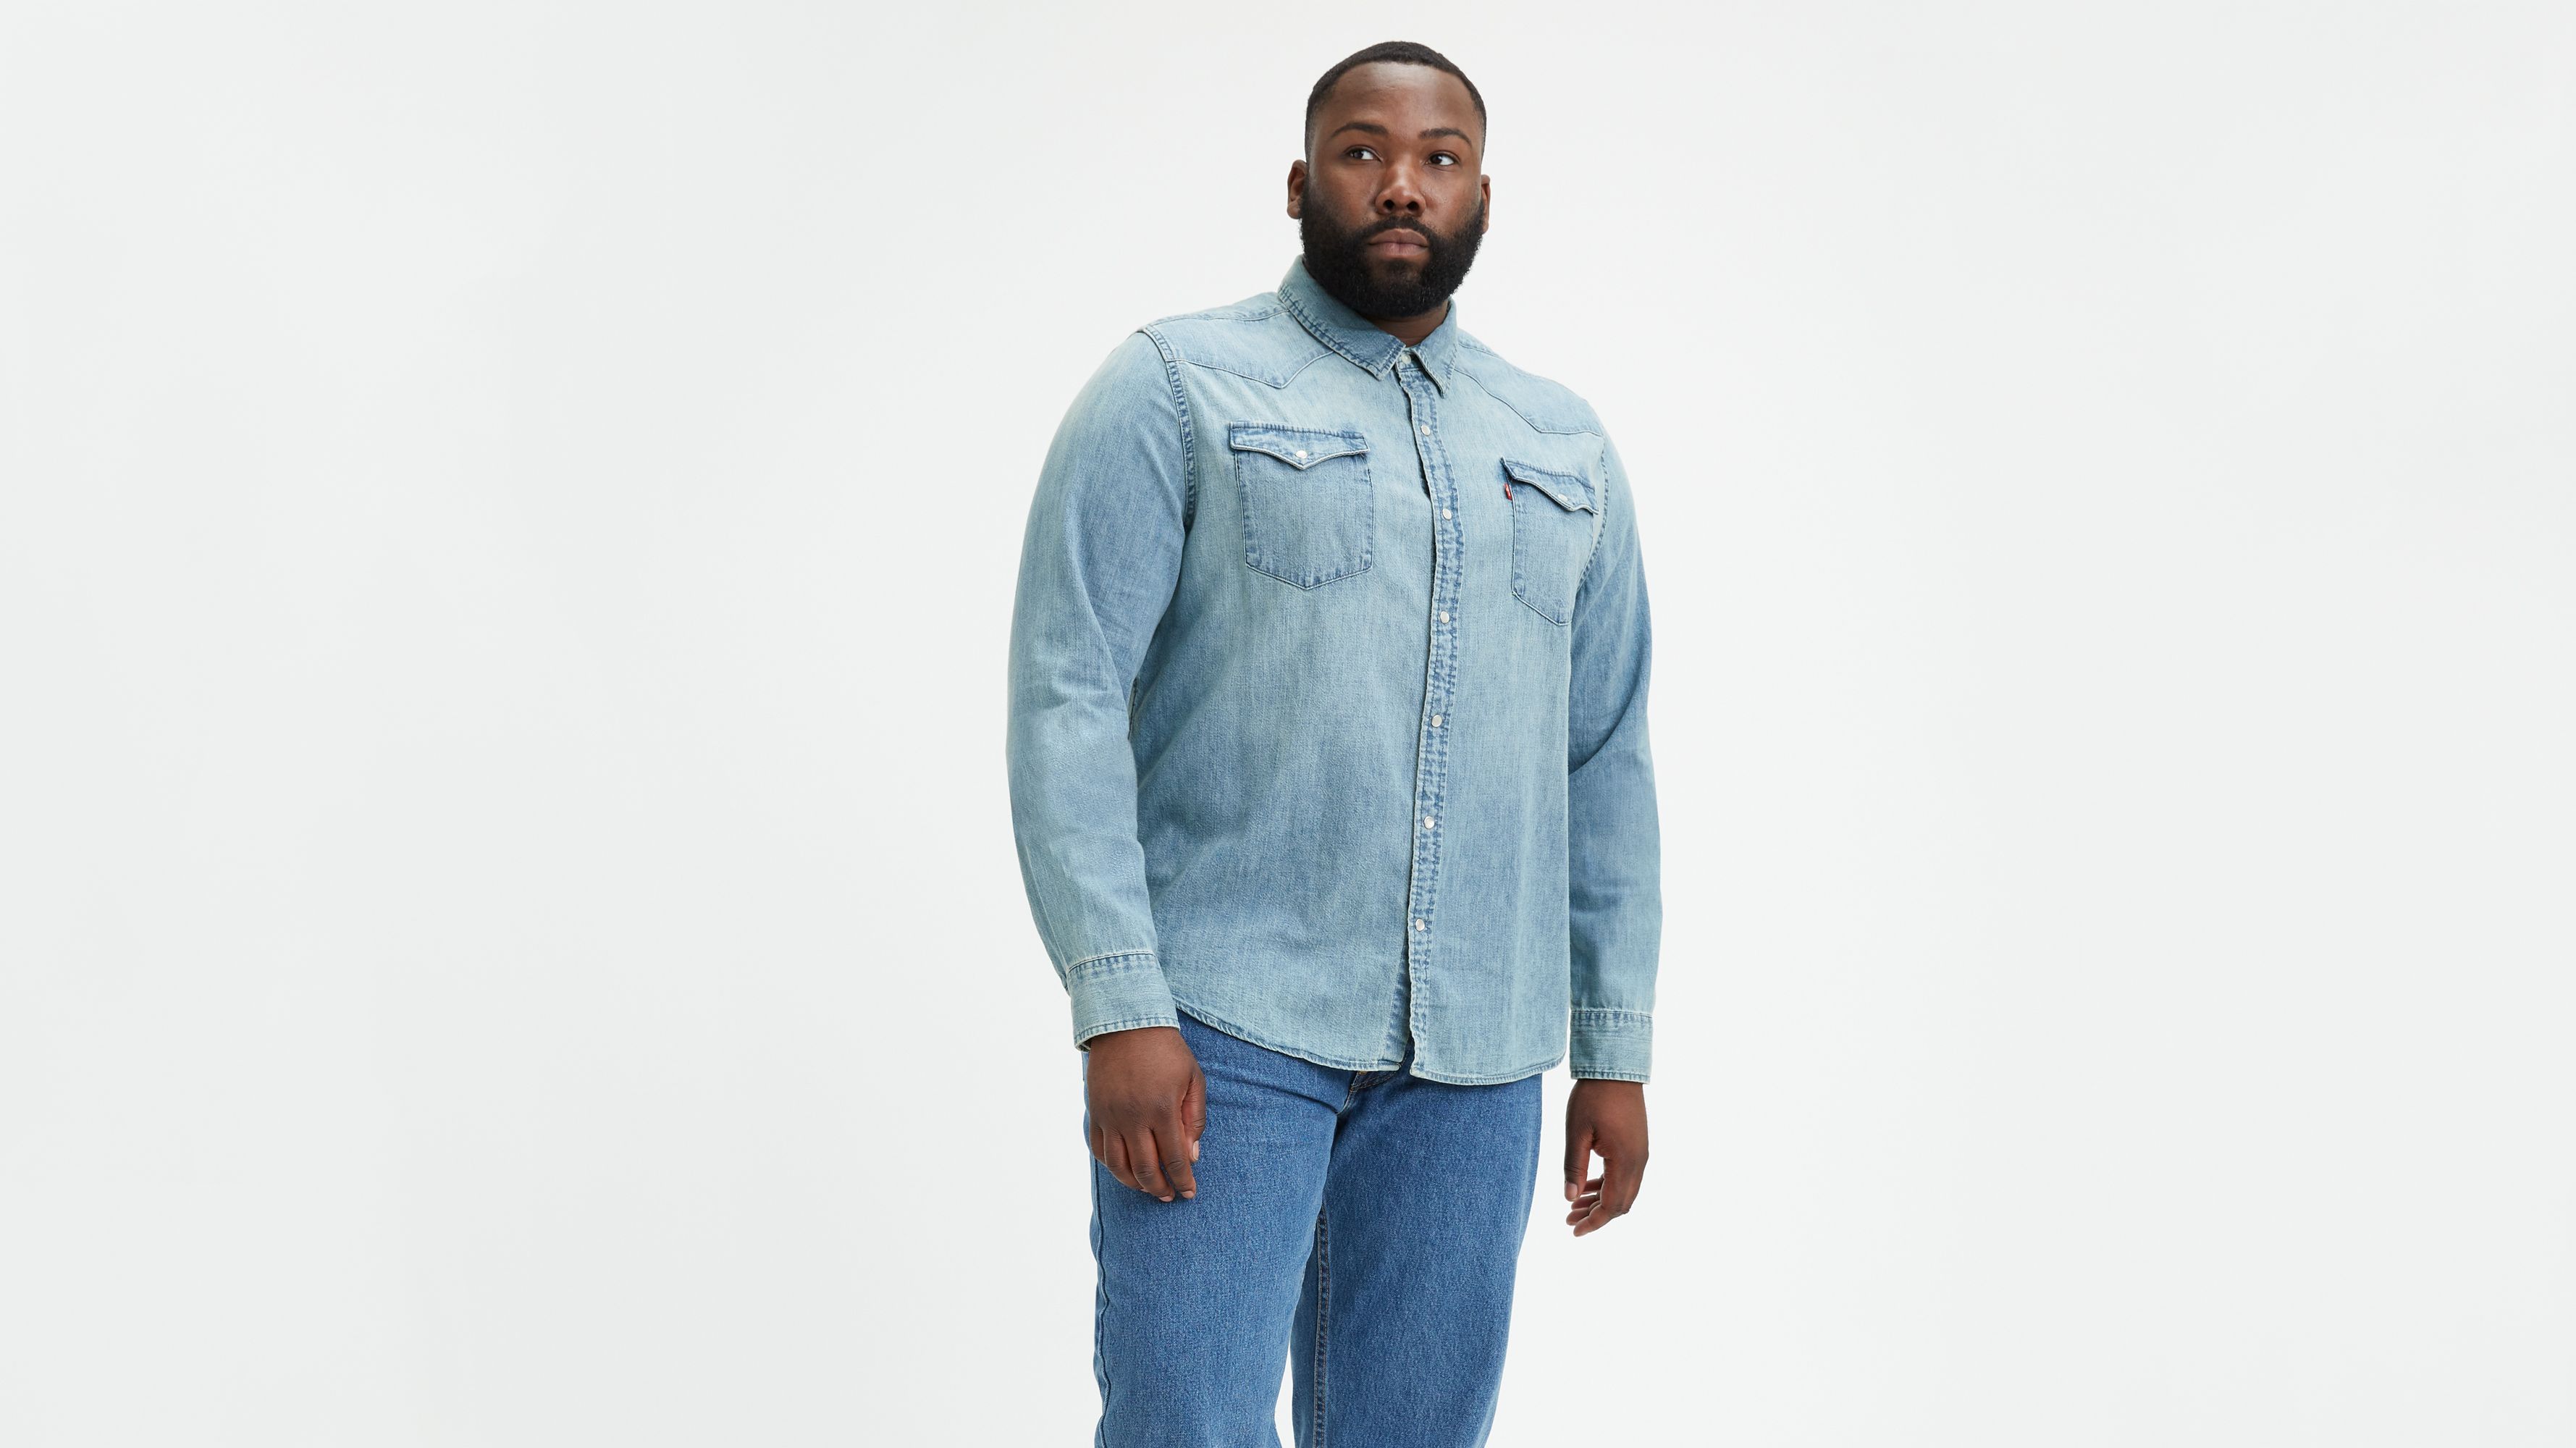 Buy the latest shirts for Men Online | Levi's India – Levis India Store